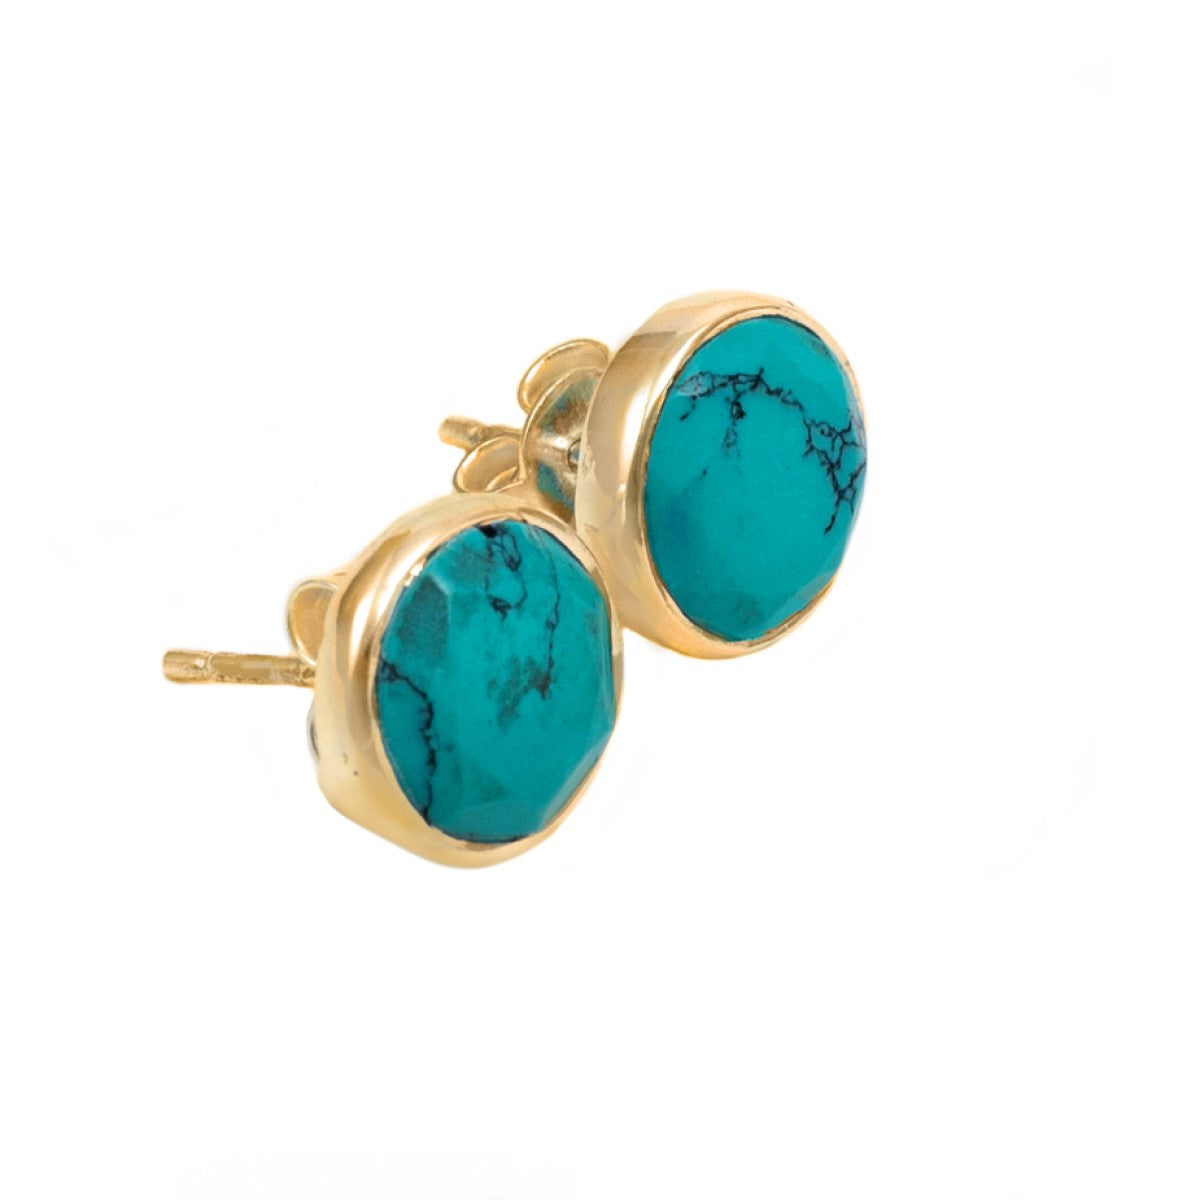 Turquoise Studs in Gold Plated Sterling Silver with a Round Faceted Gemstone